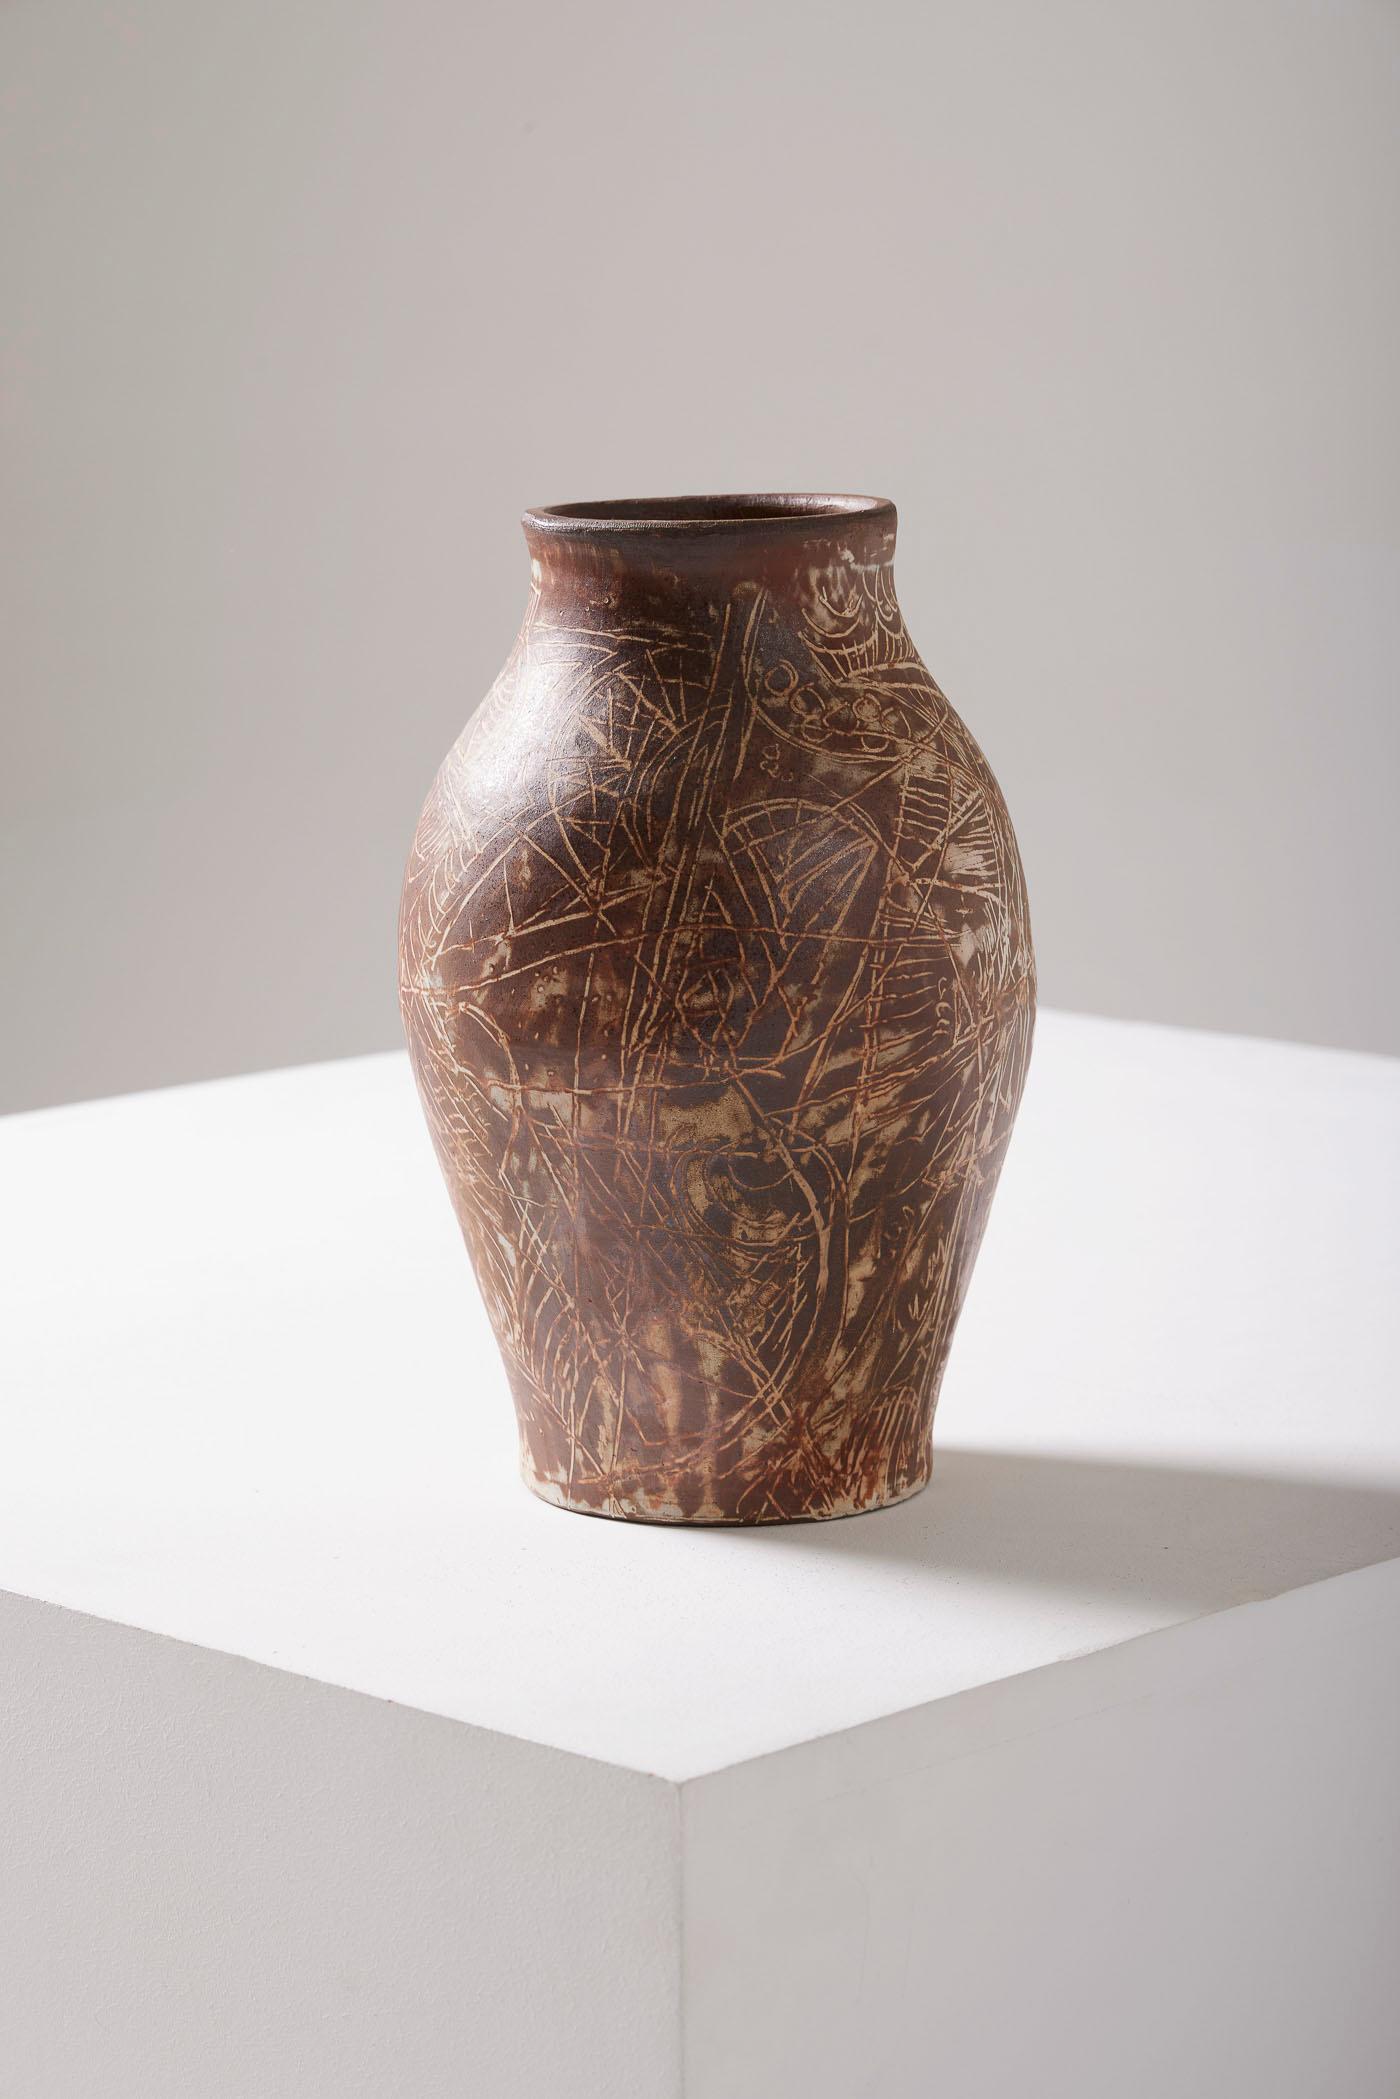 Stoneware vase by the ceramicist Vassil Ivanoff (1897-1976), dating from the 1960s. Since 1946, Vassil Ivanoff has worked in the renowned pottery village of La Borne. In very good condition.
LP1111